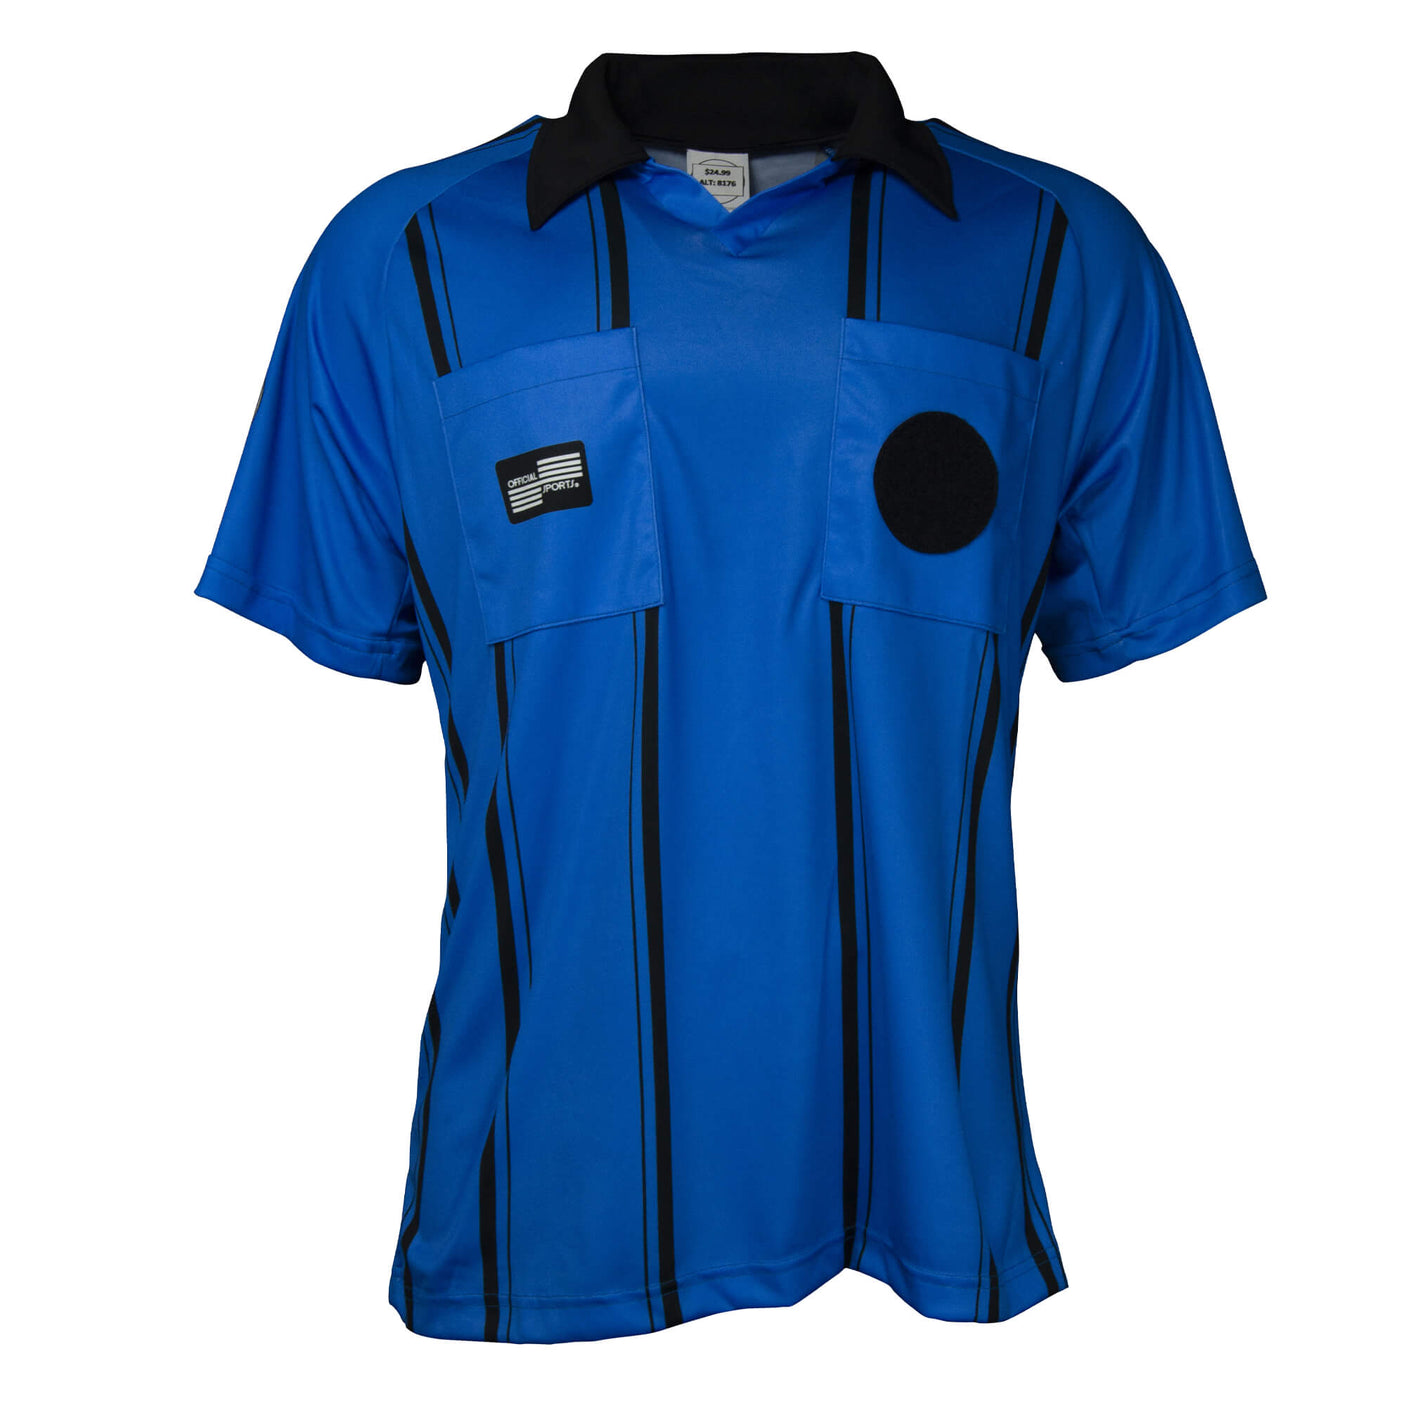 Official Sports Men's USSF Economy SS Shirt Blue/Black